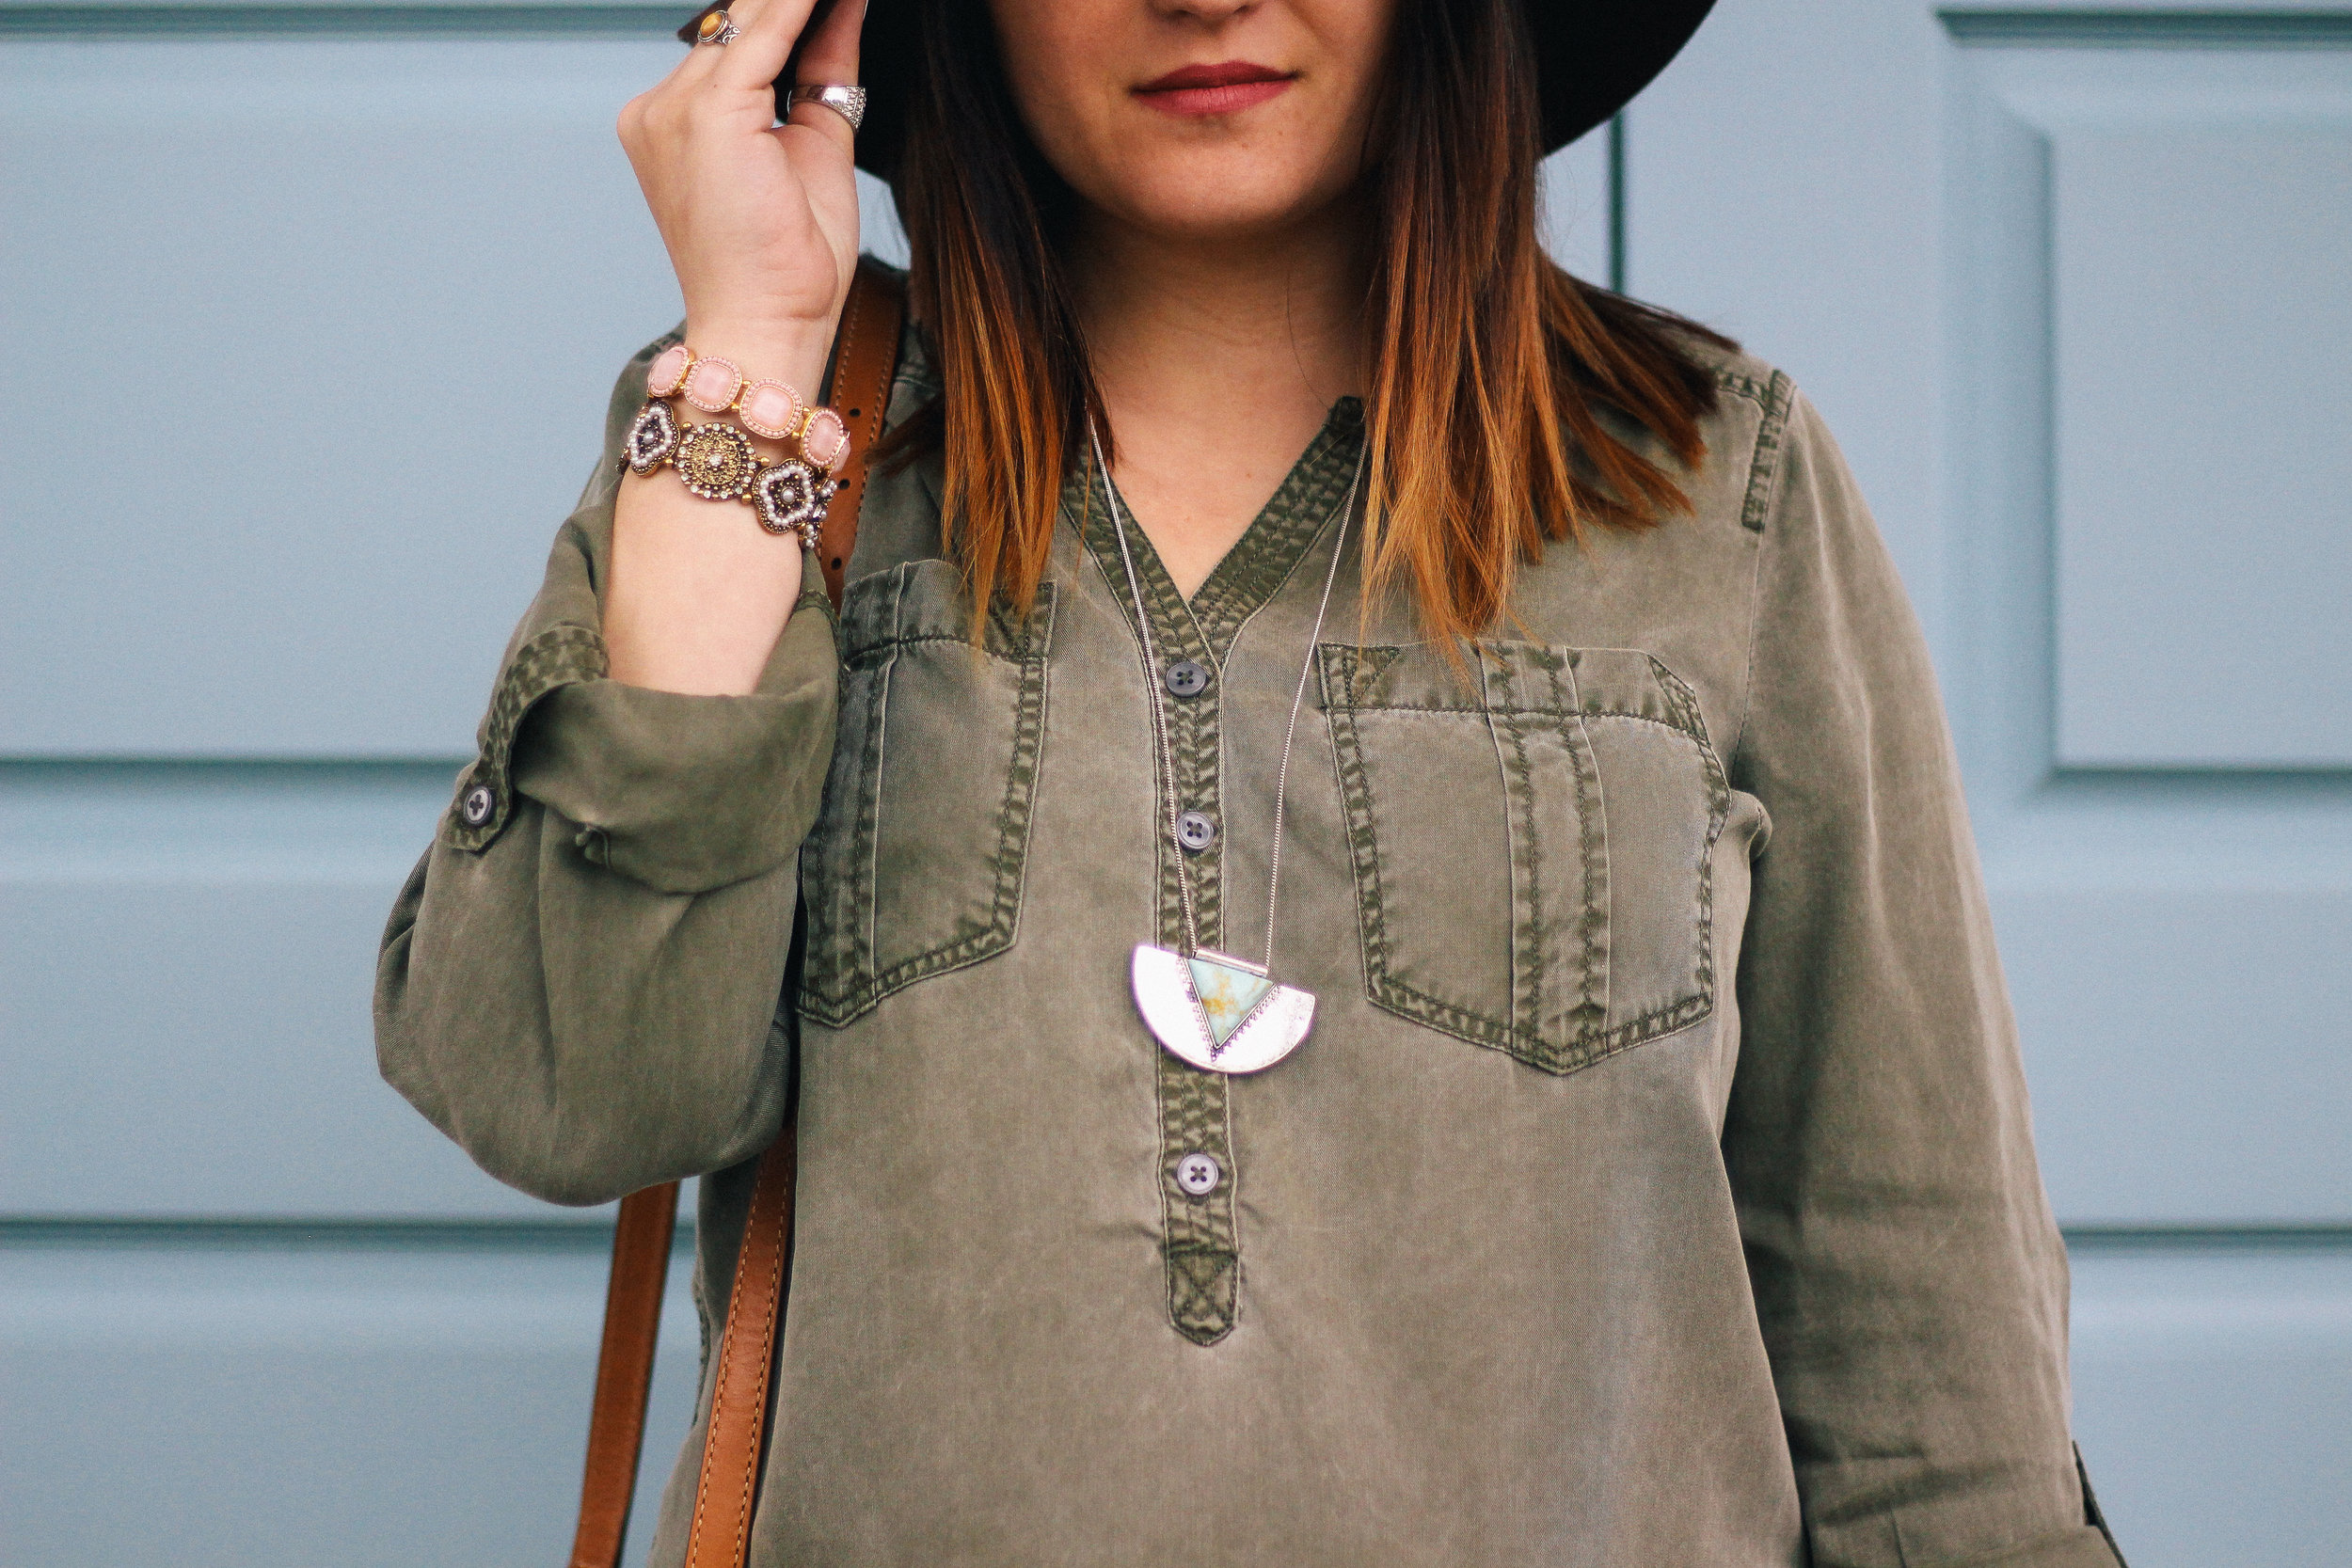 Spring Style @express @freepeople @francescas @thefryecompany via chelceytate.com